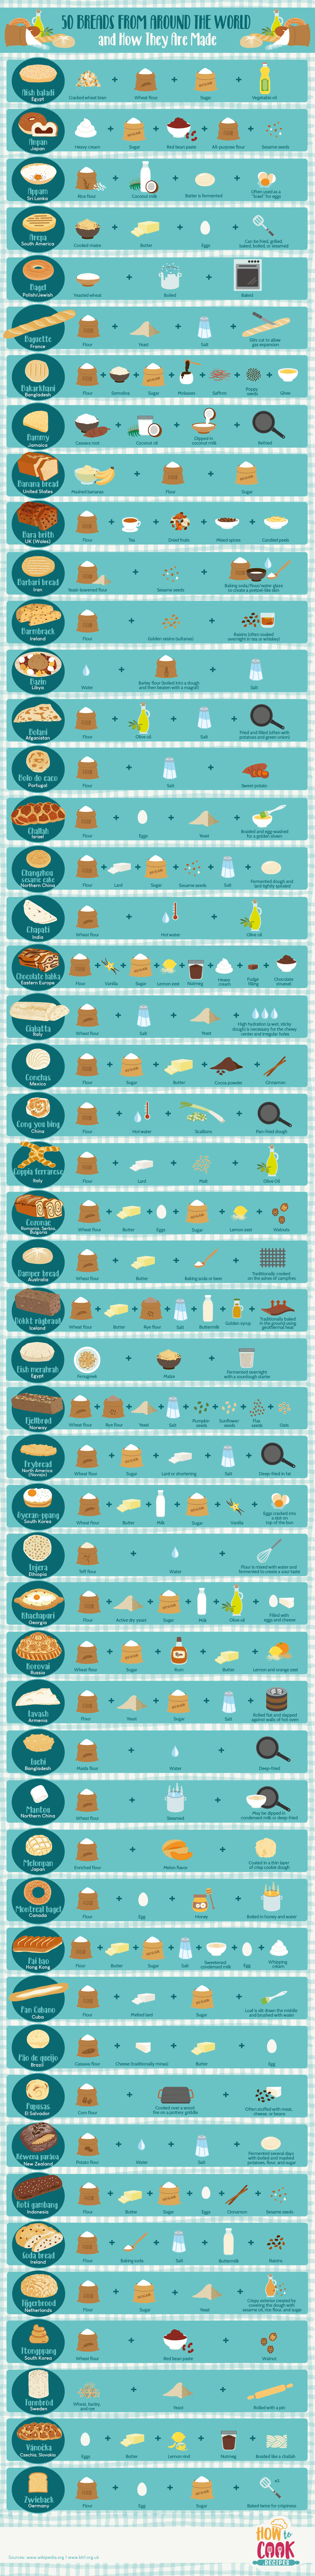 50 Breads From Around the World and How They Are Made